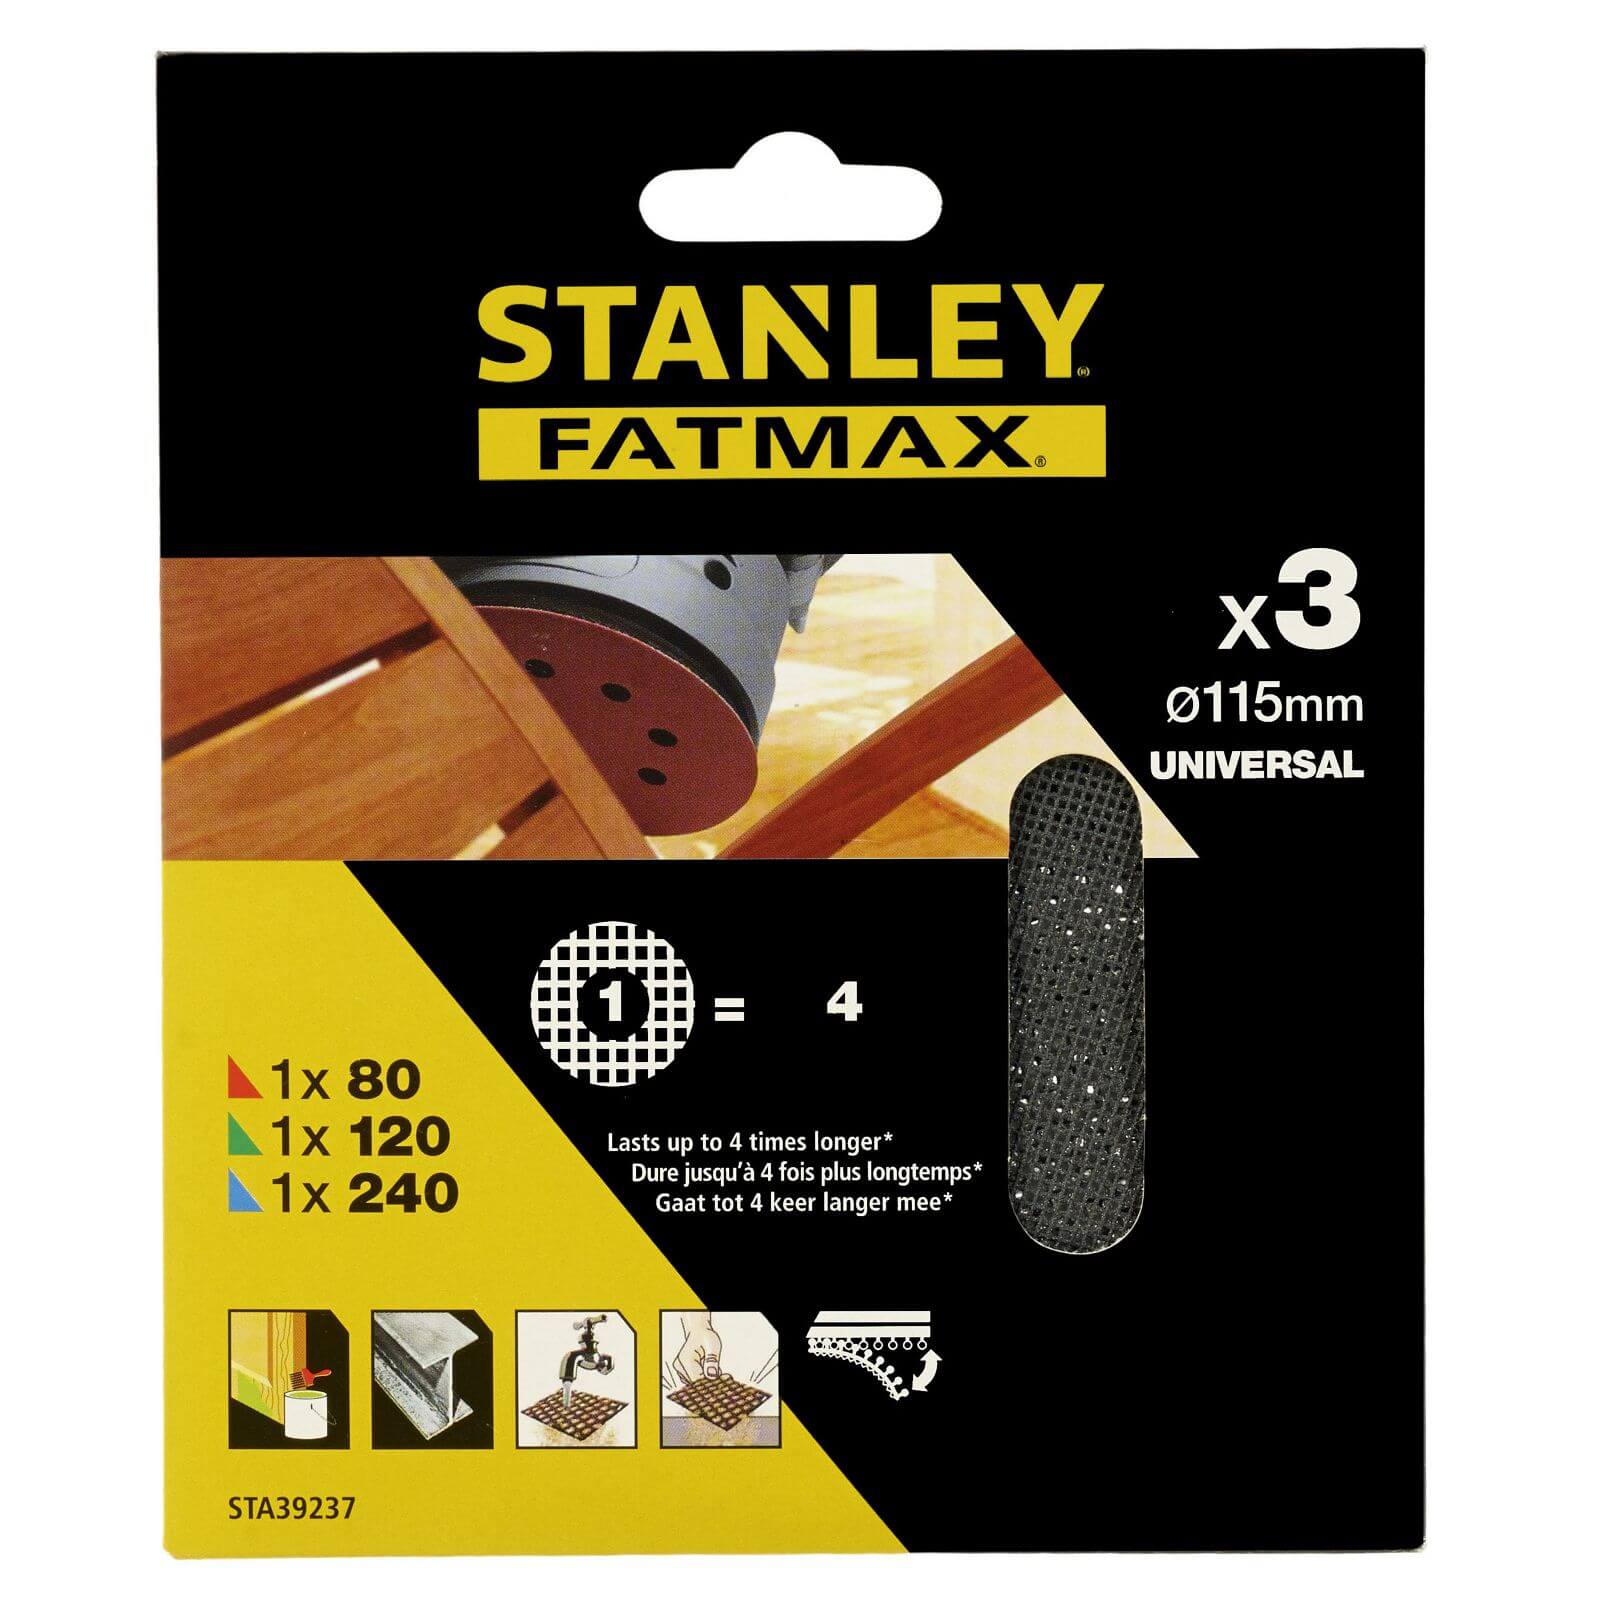 Stanley Fatmax 115mm ROS Sheets MESH Mixed Pack - STA39237-XJ